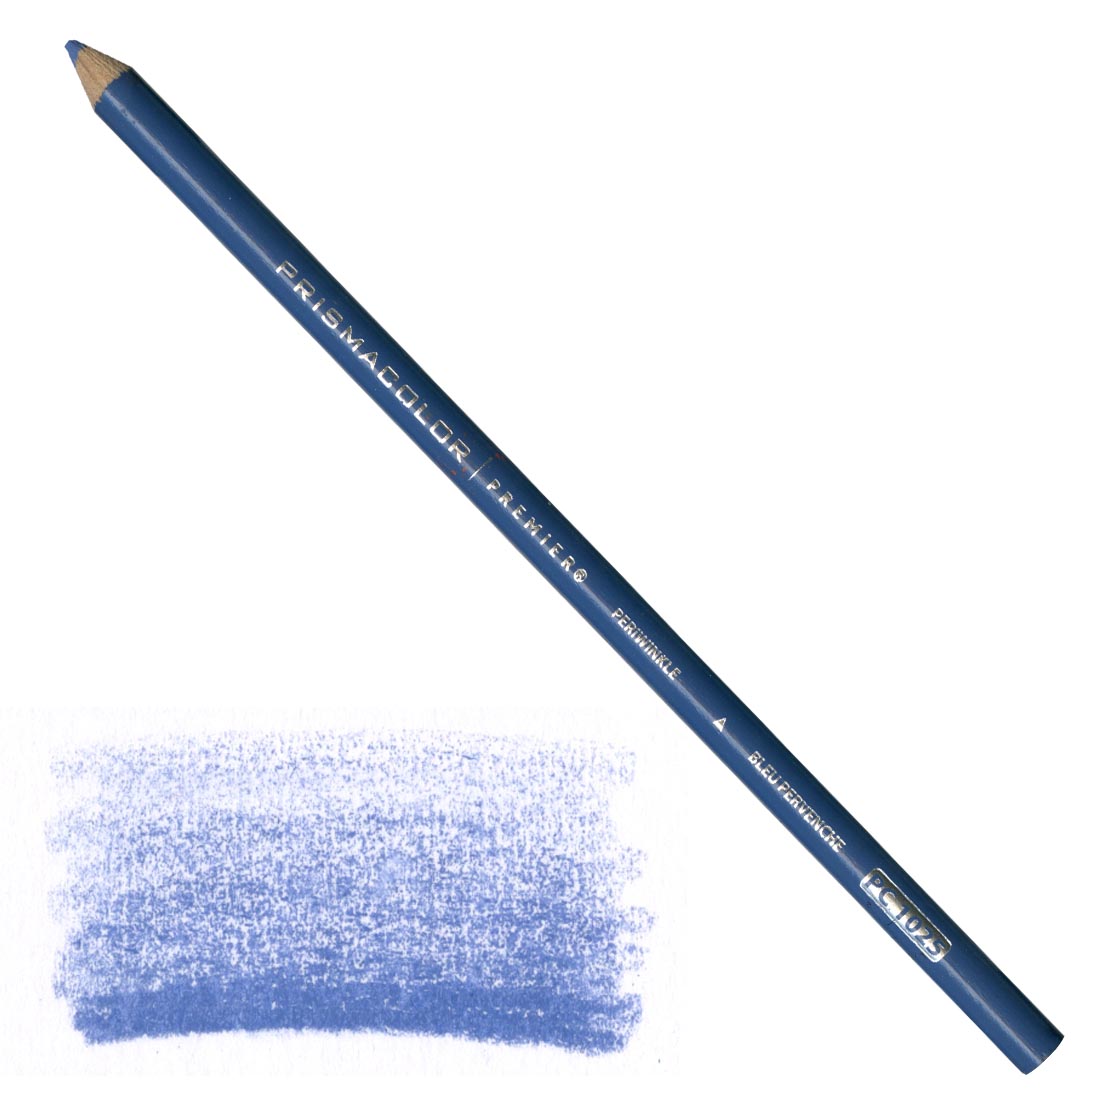 Periwinkle Prismacolor Premier Colored Pencil with a sample colored swatch